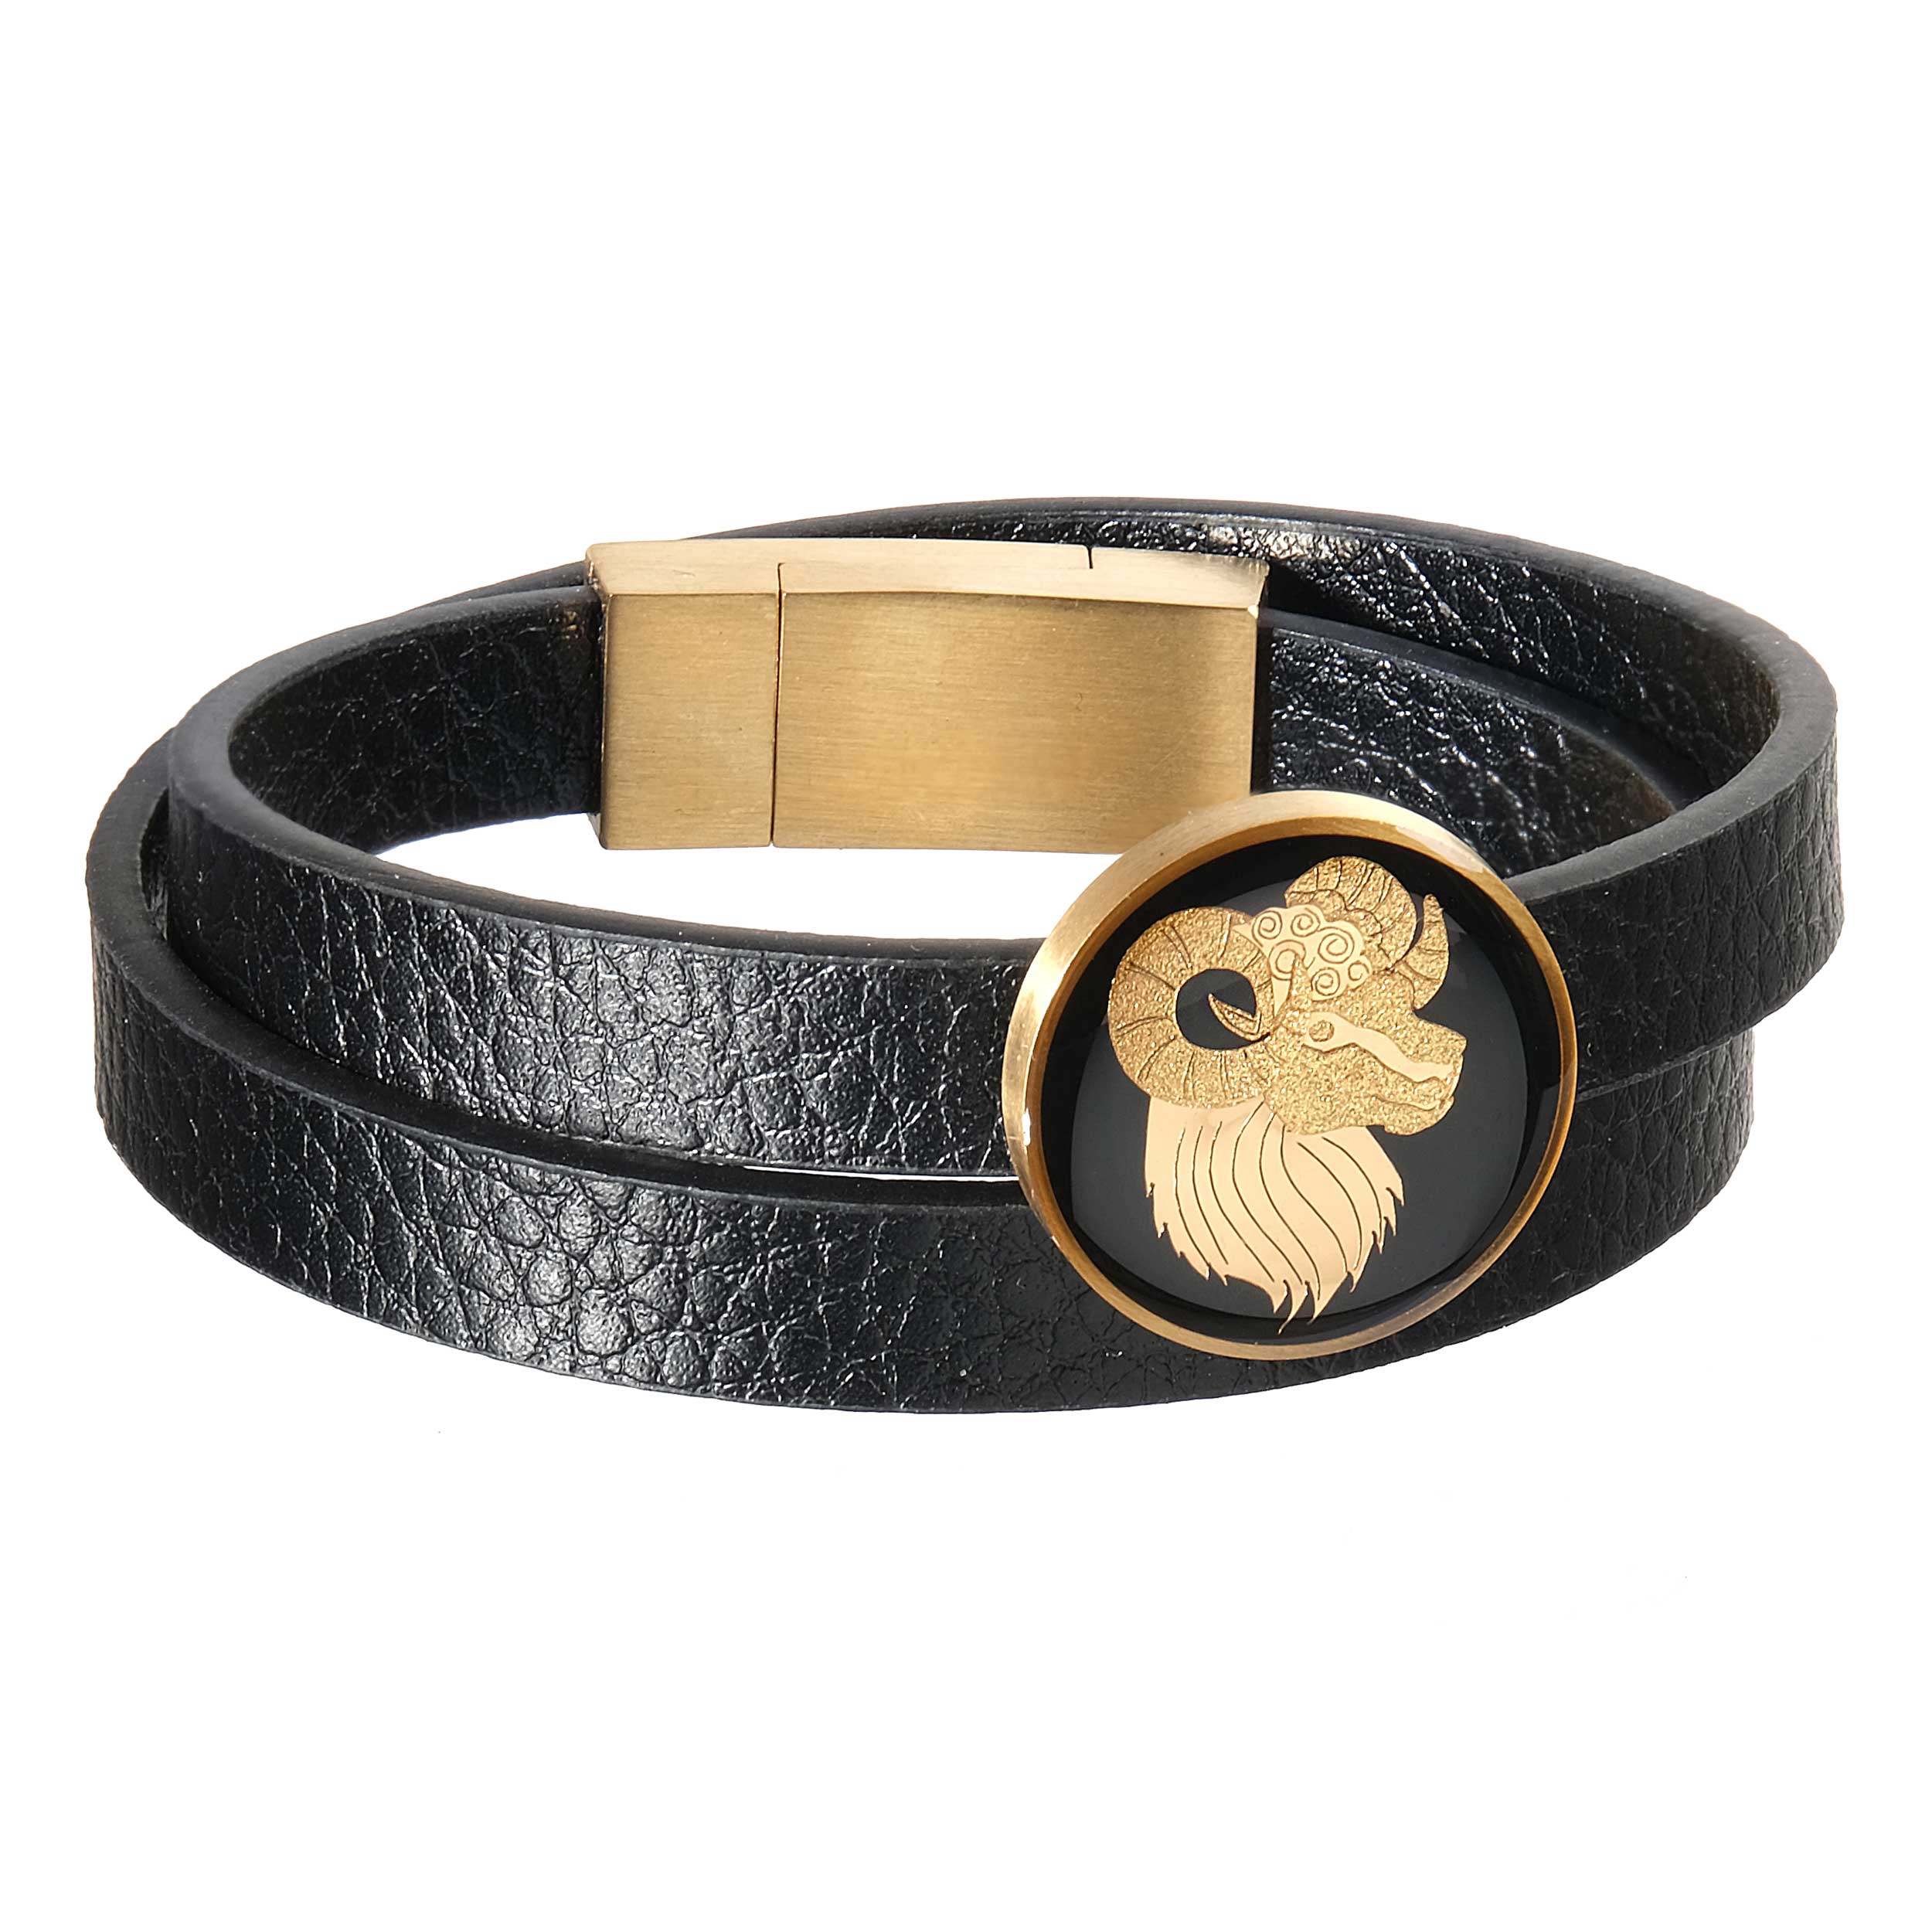 Men's leather bracelet and 24 carat gold leaf with the symbol design of the month of Farvardin